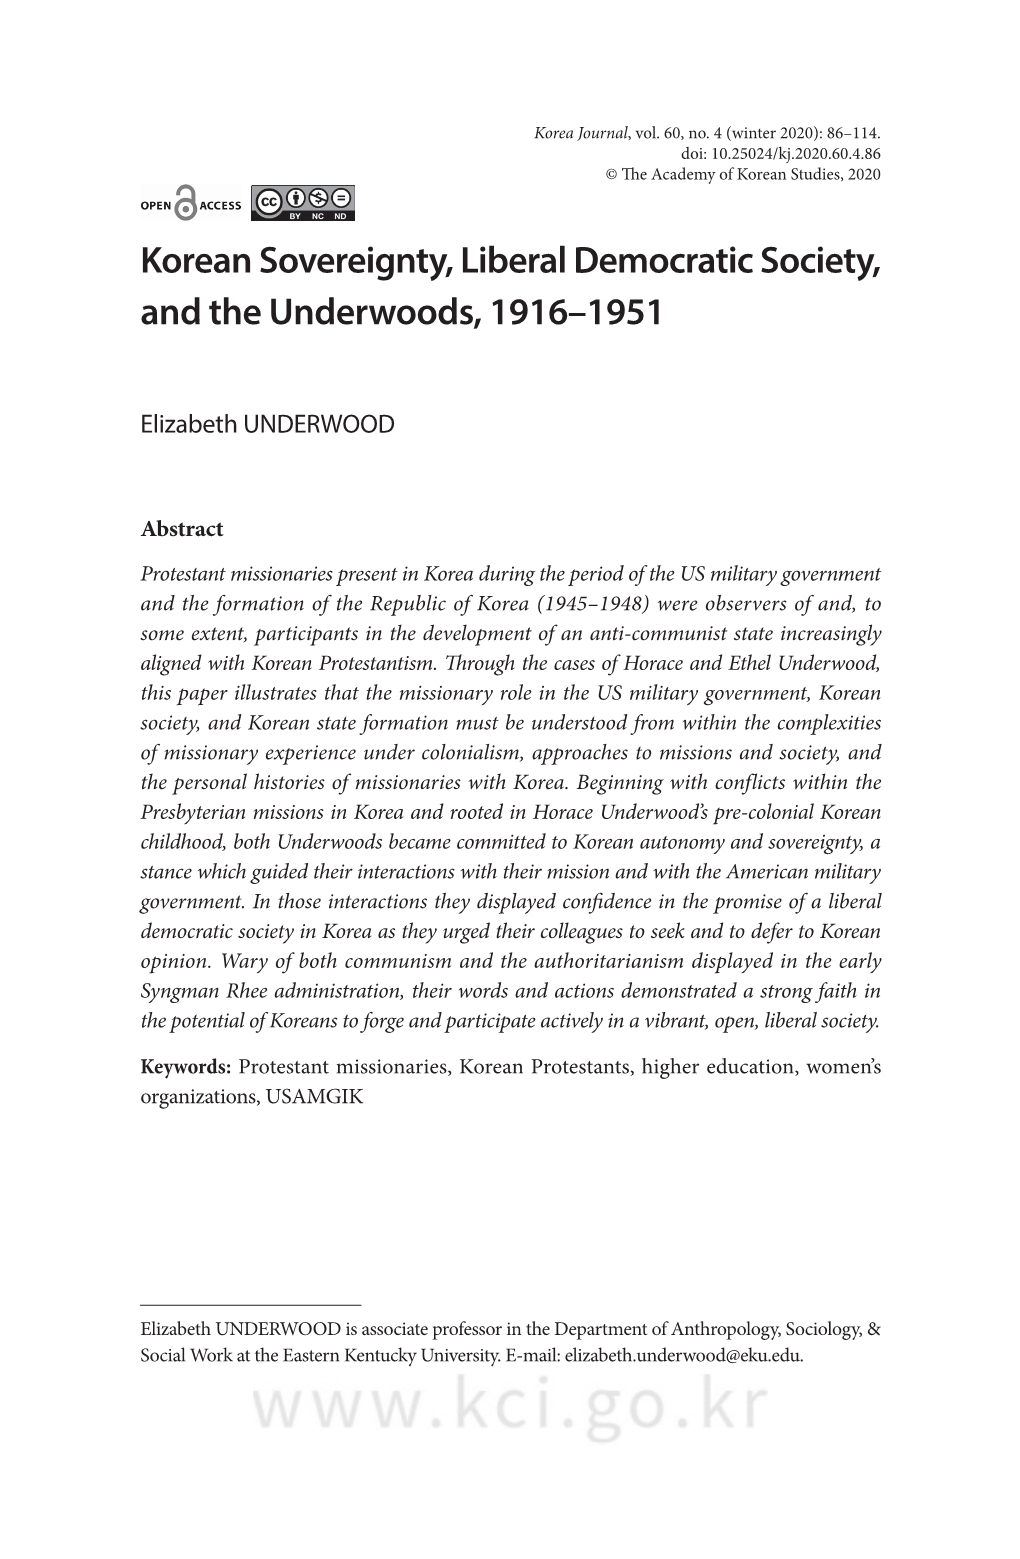 Korean Sovereignty, Liberal Democratic Society, and the Underwoods, 1916–1951